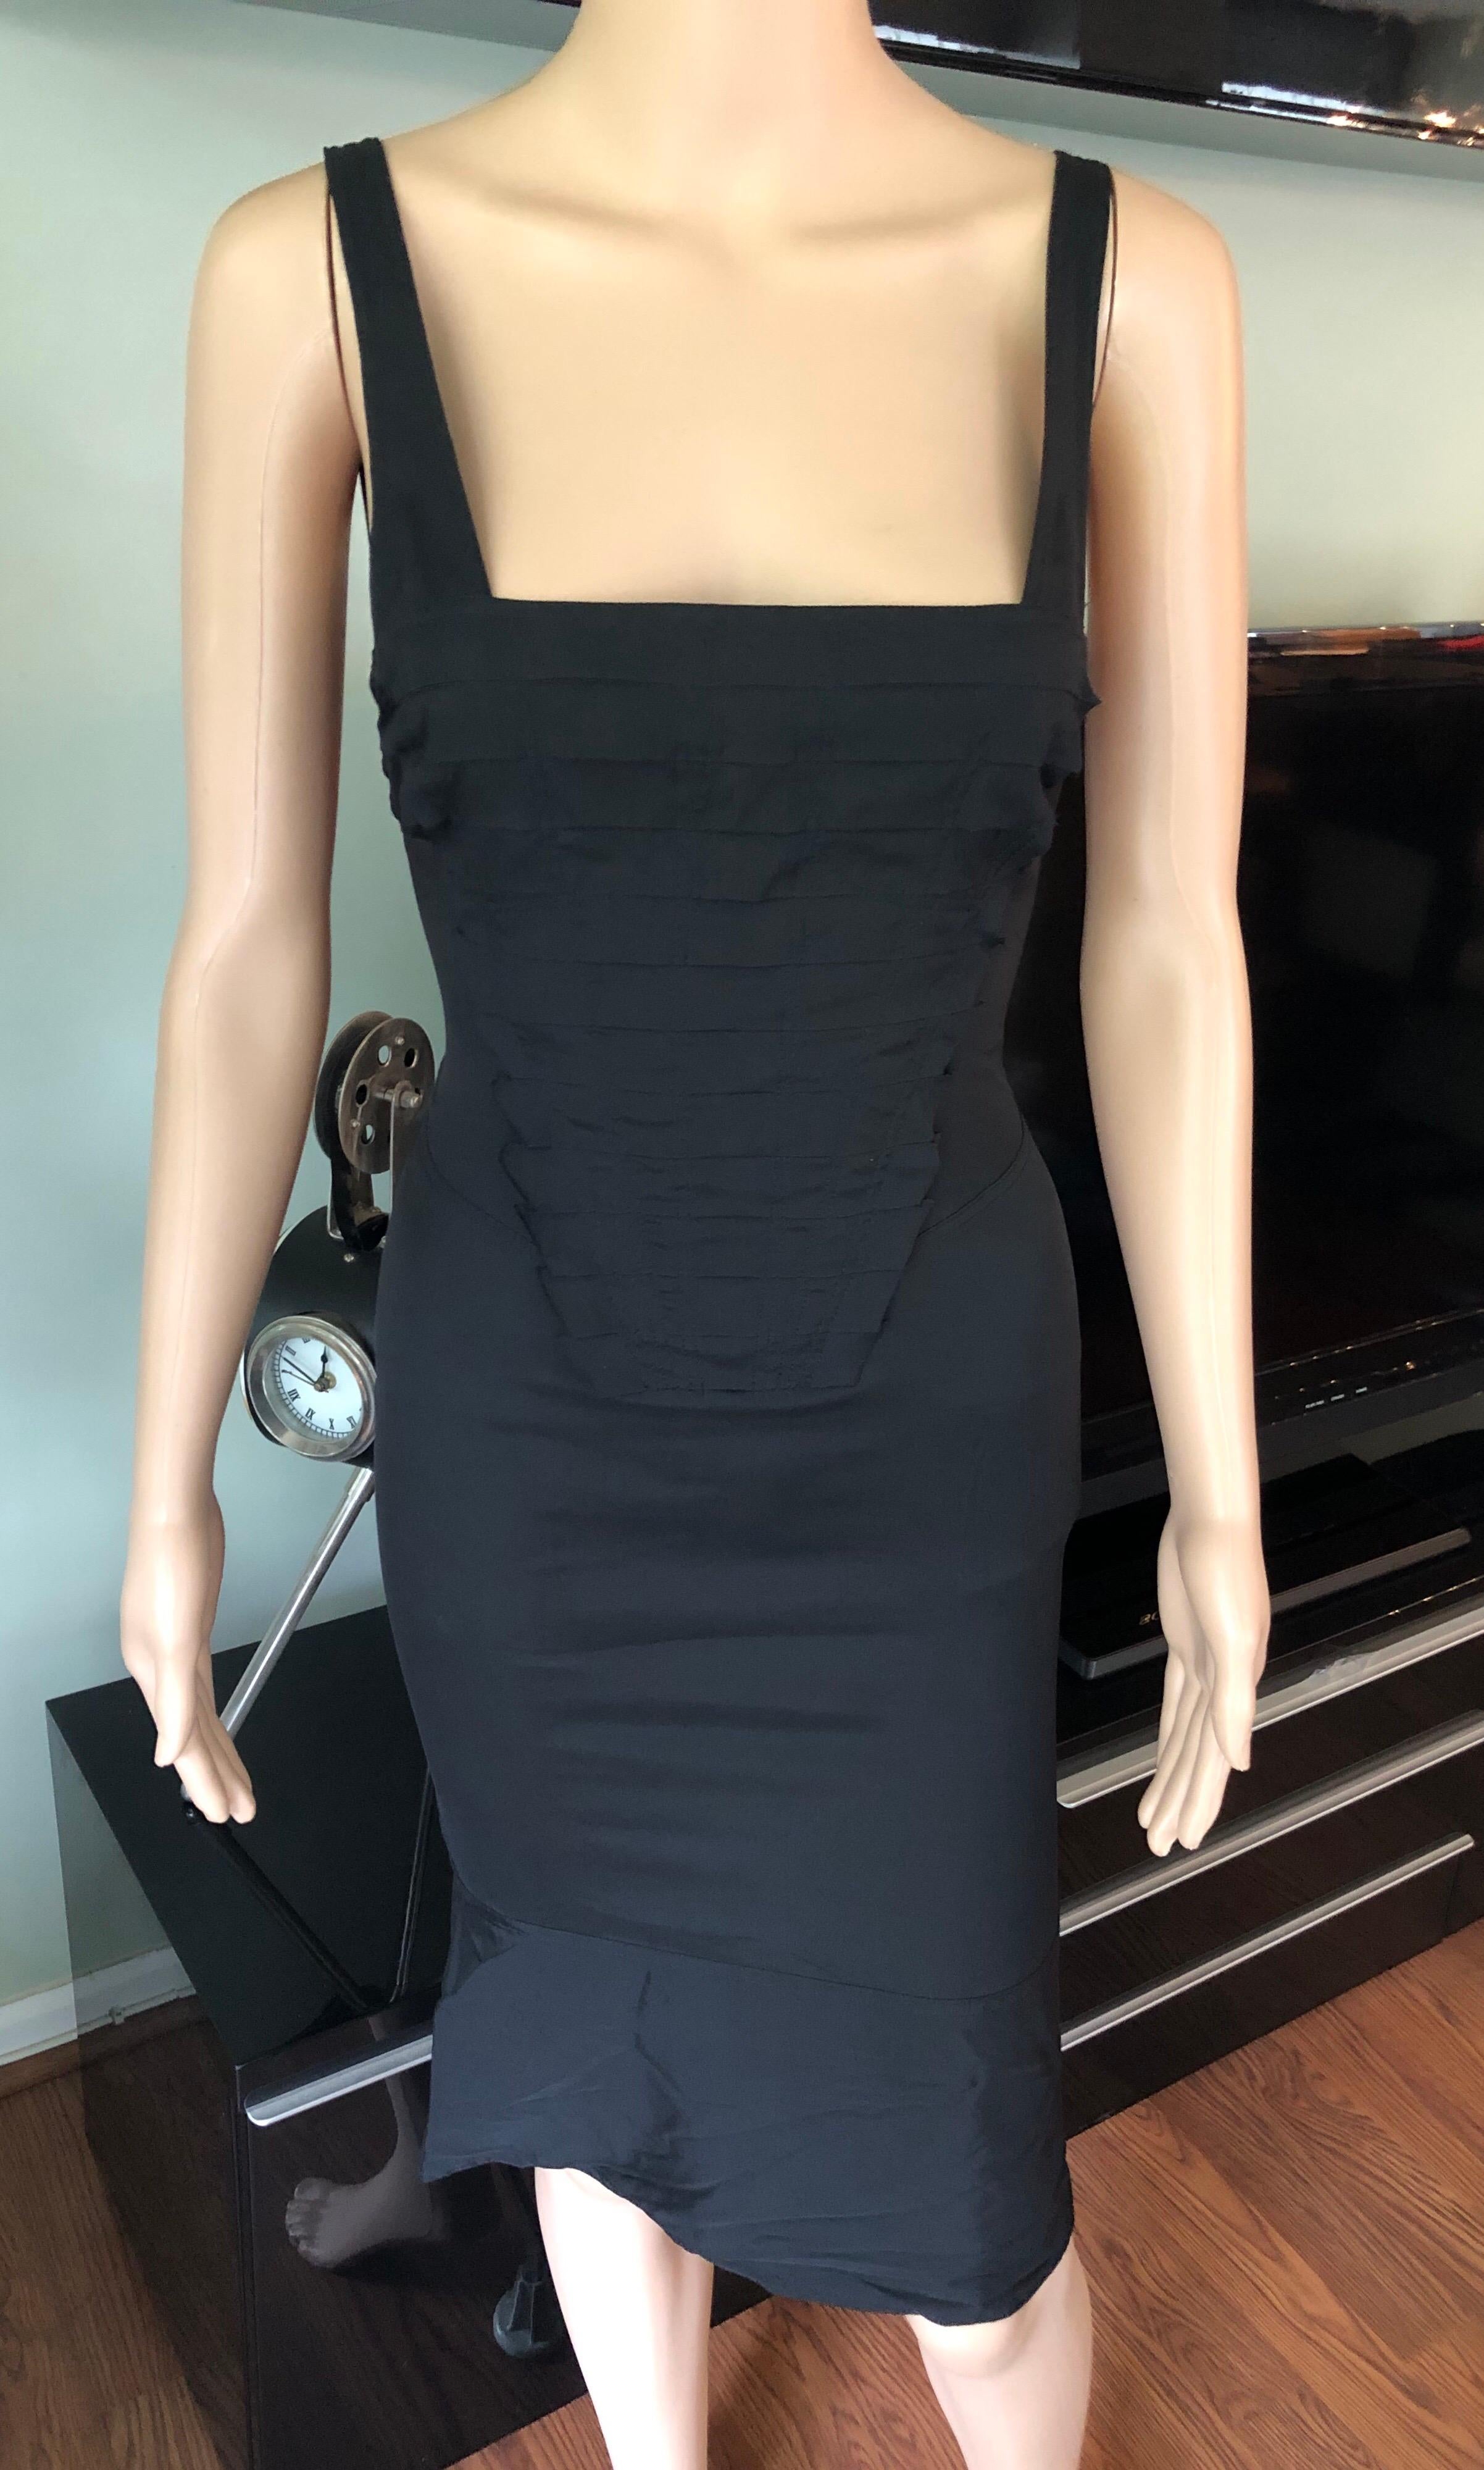 Gucci by Tom Ford S/S 2004 Cutout Black Dress IT 42

Gucci dress with tiered accents, square neckline and concealed zip closure at side. 
